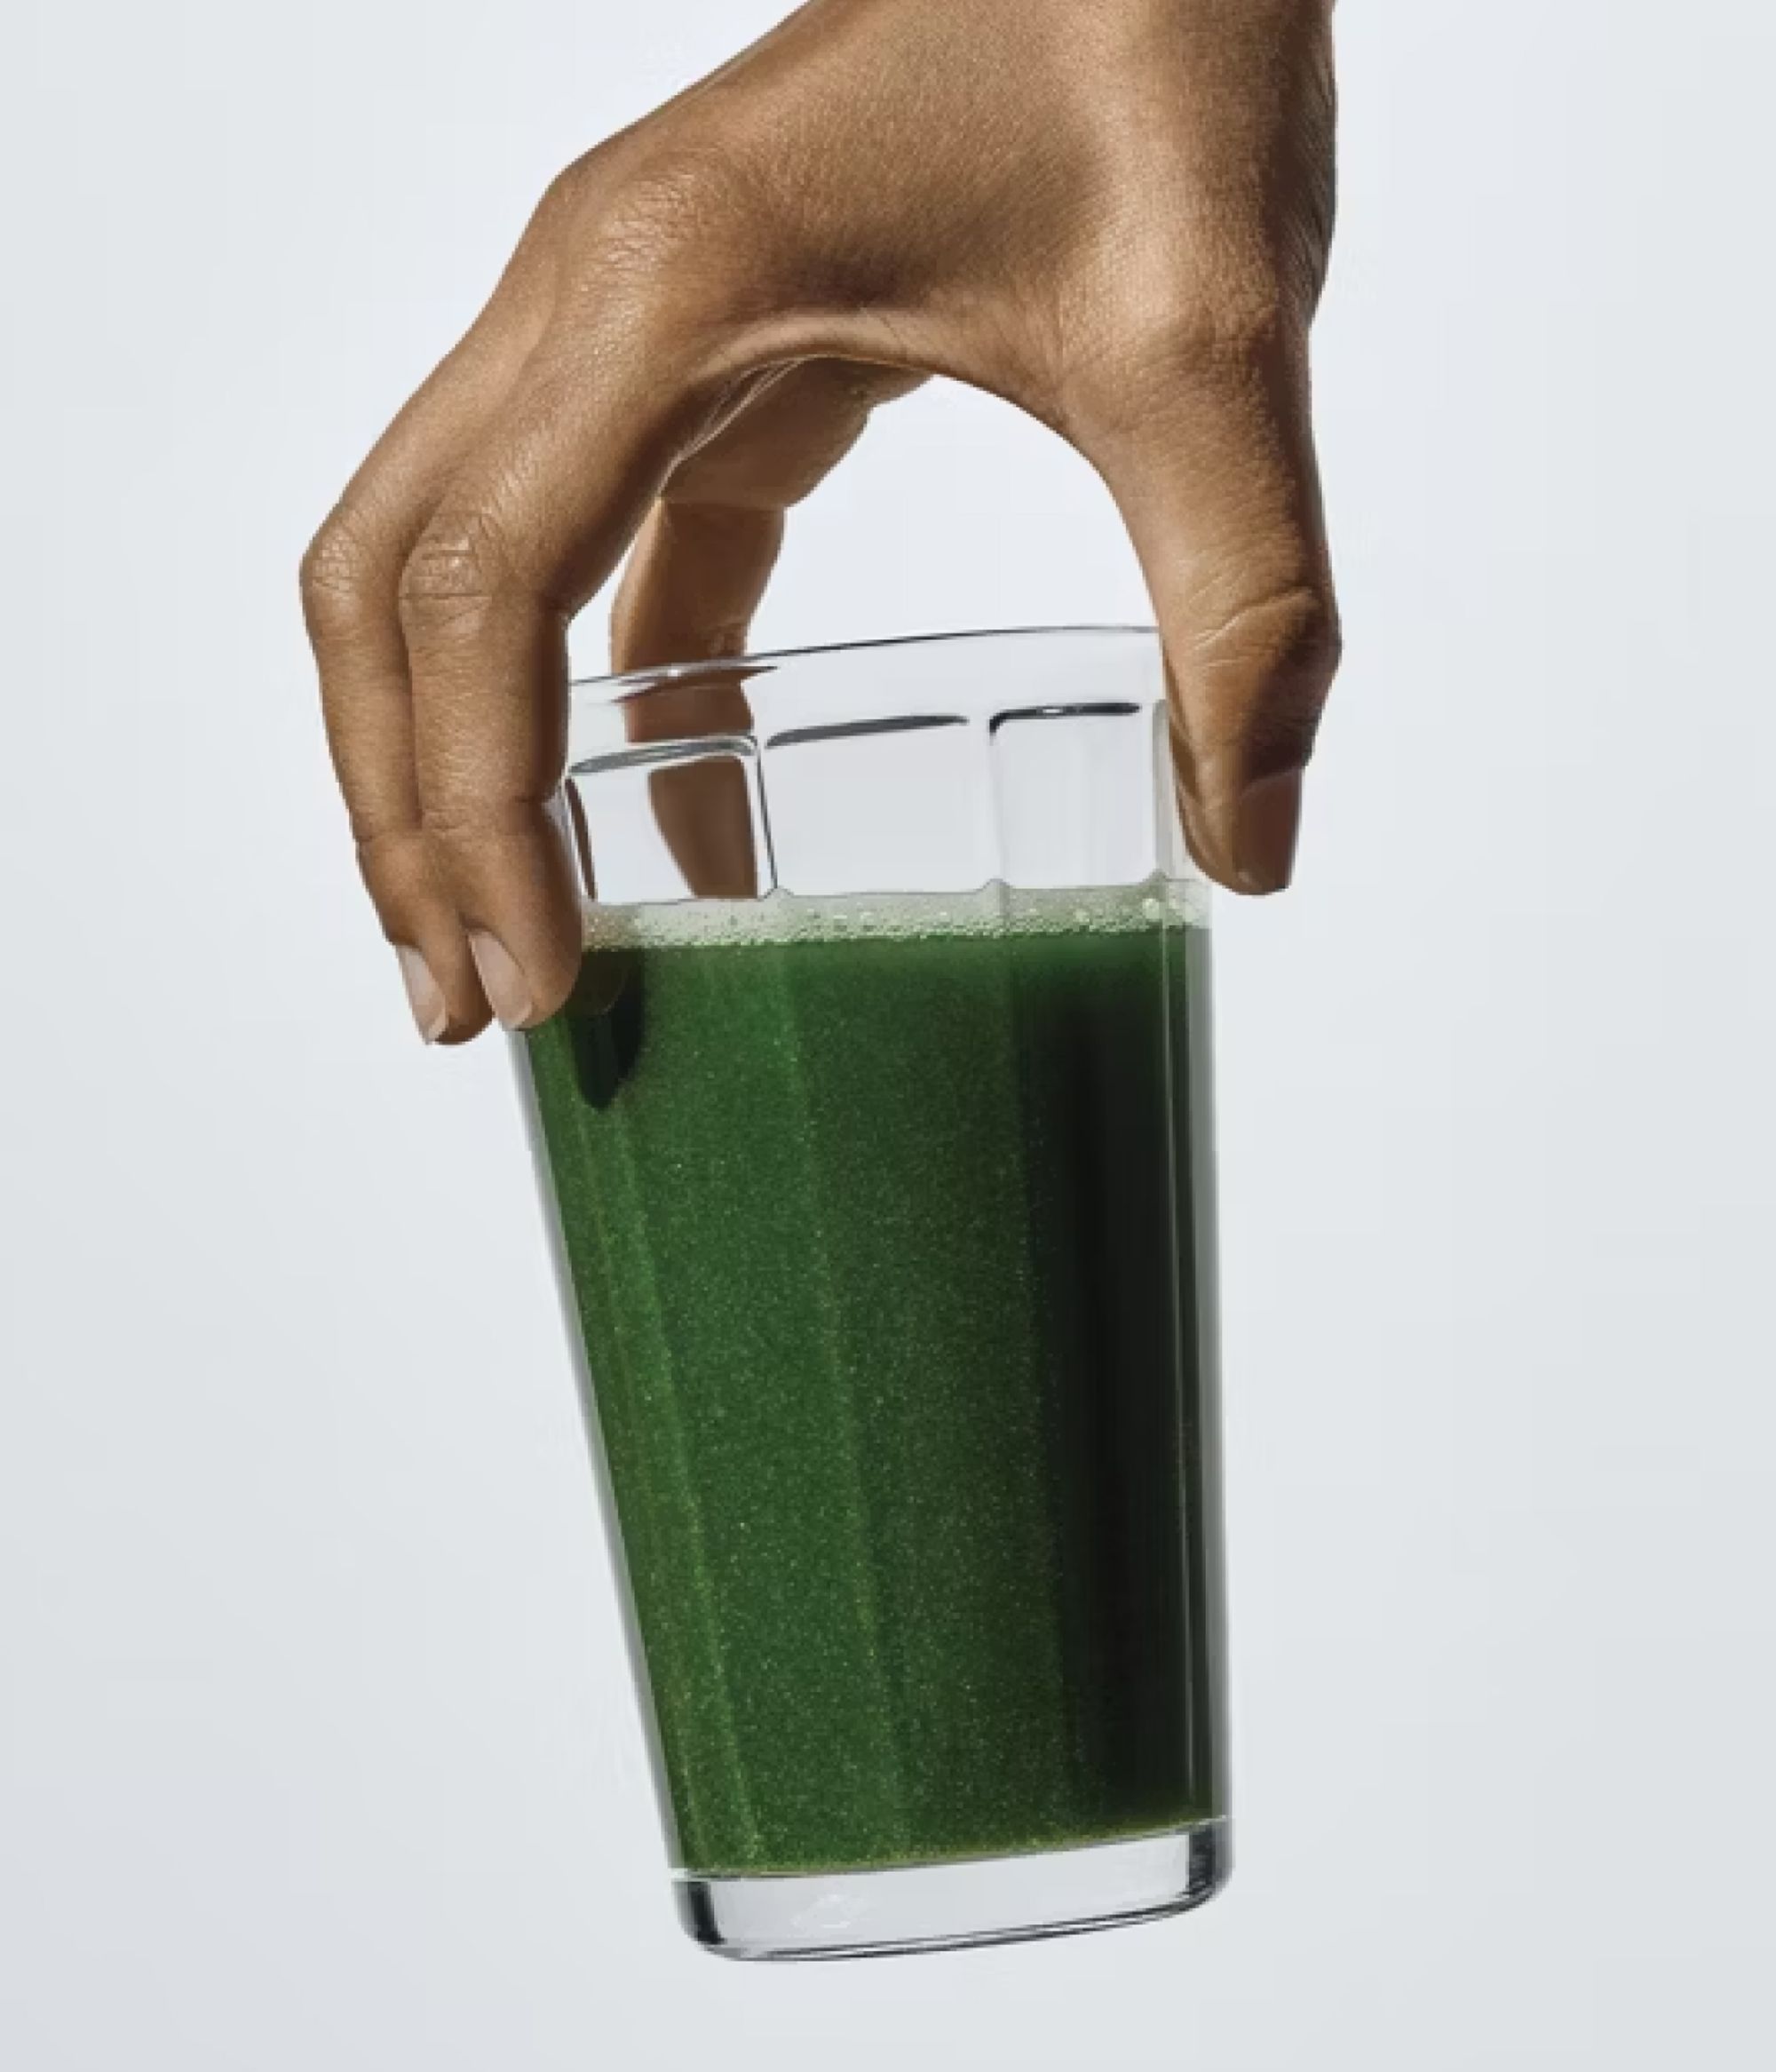 Athletic Greens Review - Is This Green Juice Worth Paying For?